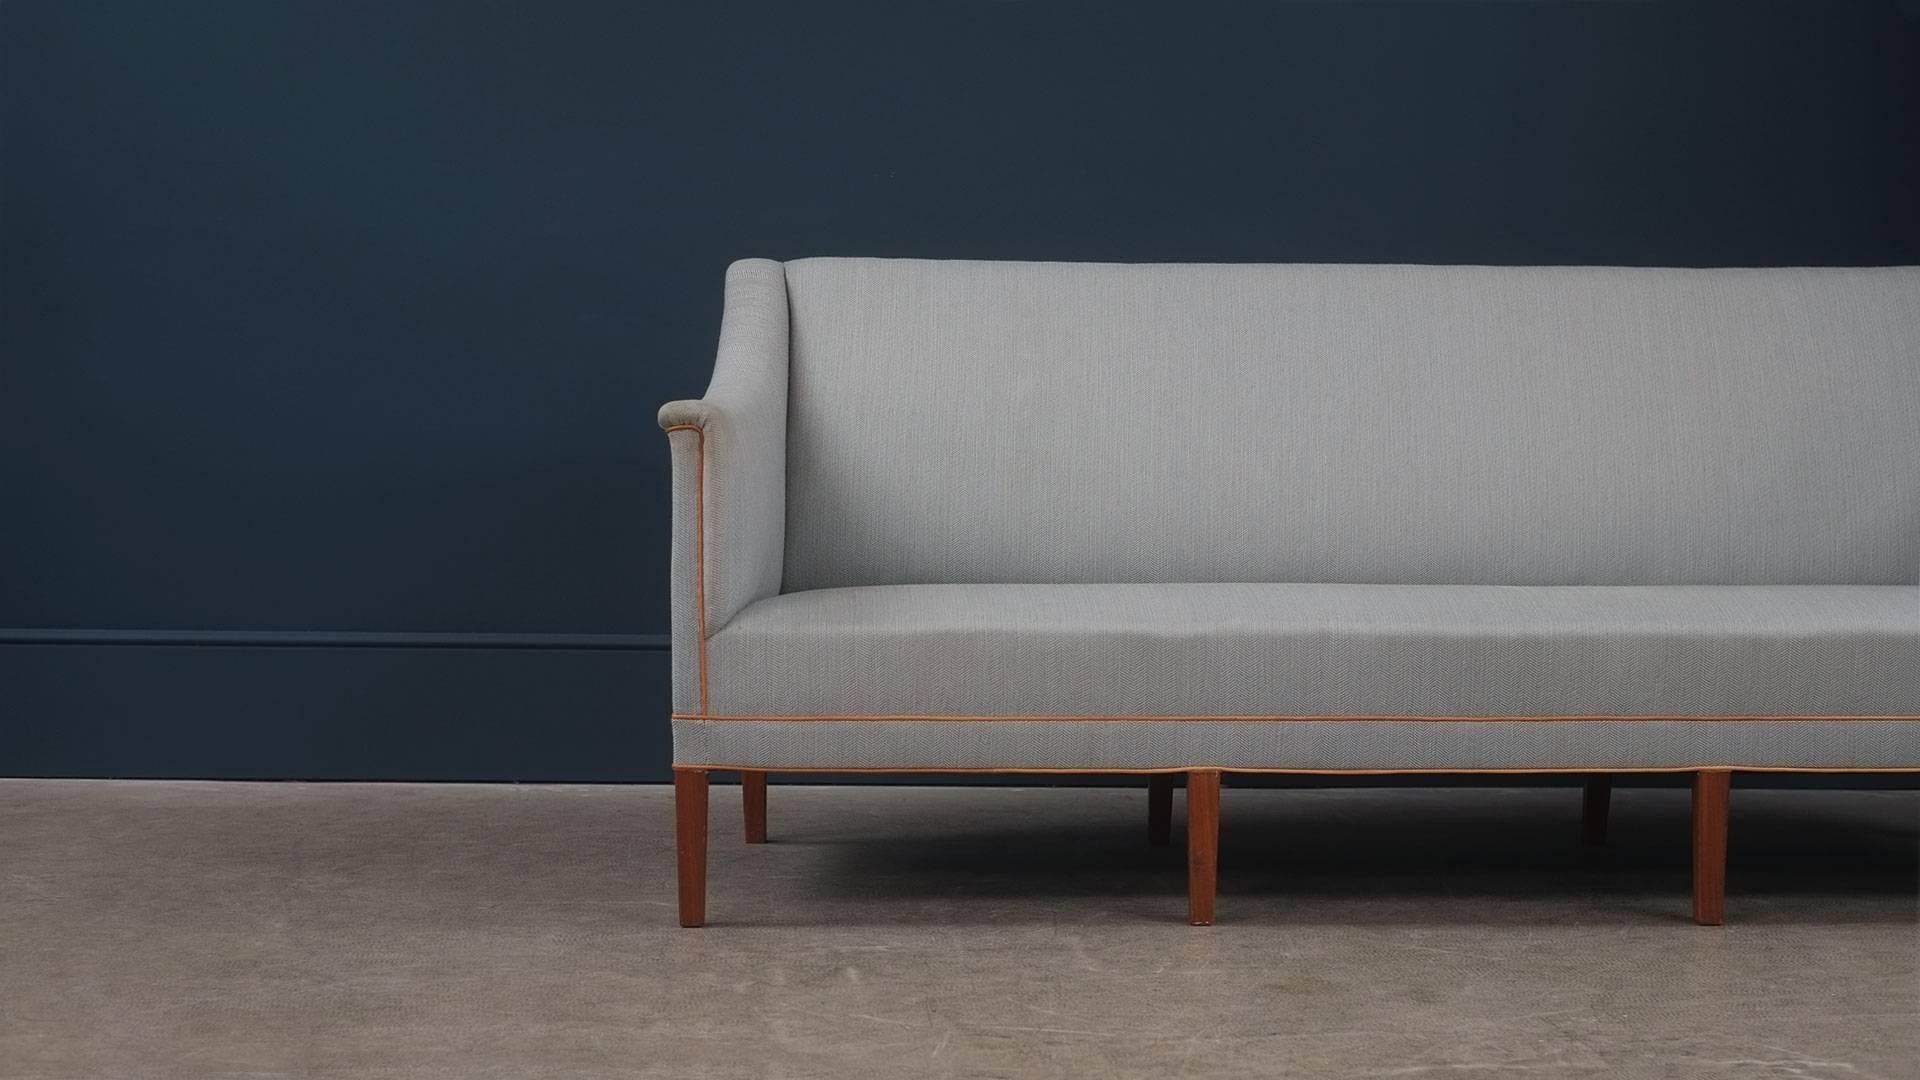 Amazing sofa designed by Kaare Klint for rud. Rasmussens Snedkerier, Denmark, 1941. Ultra elegant and super high quality piece with eight solid teak legs. This example in grey/blue fabric with natural leather piping. Superb and sought after piece.